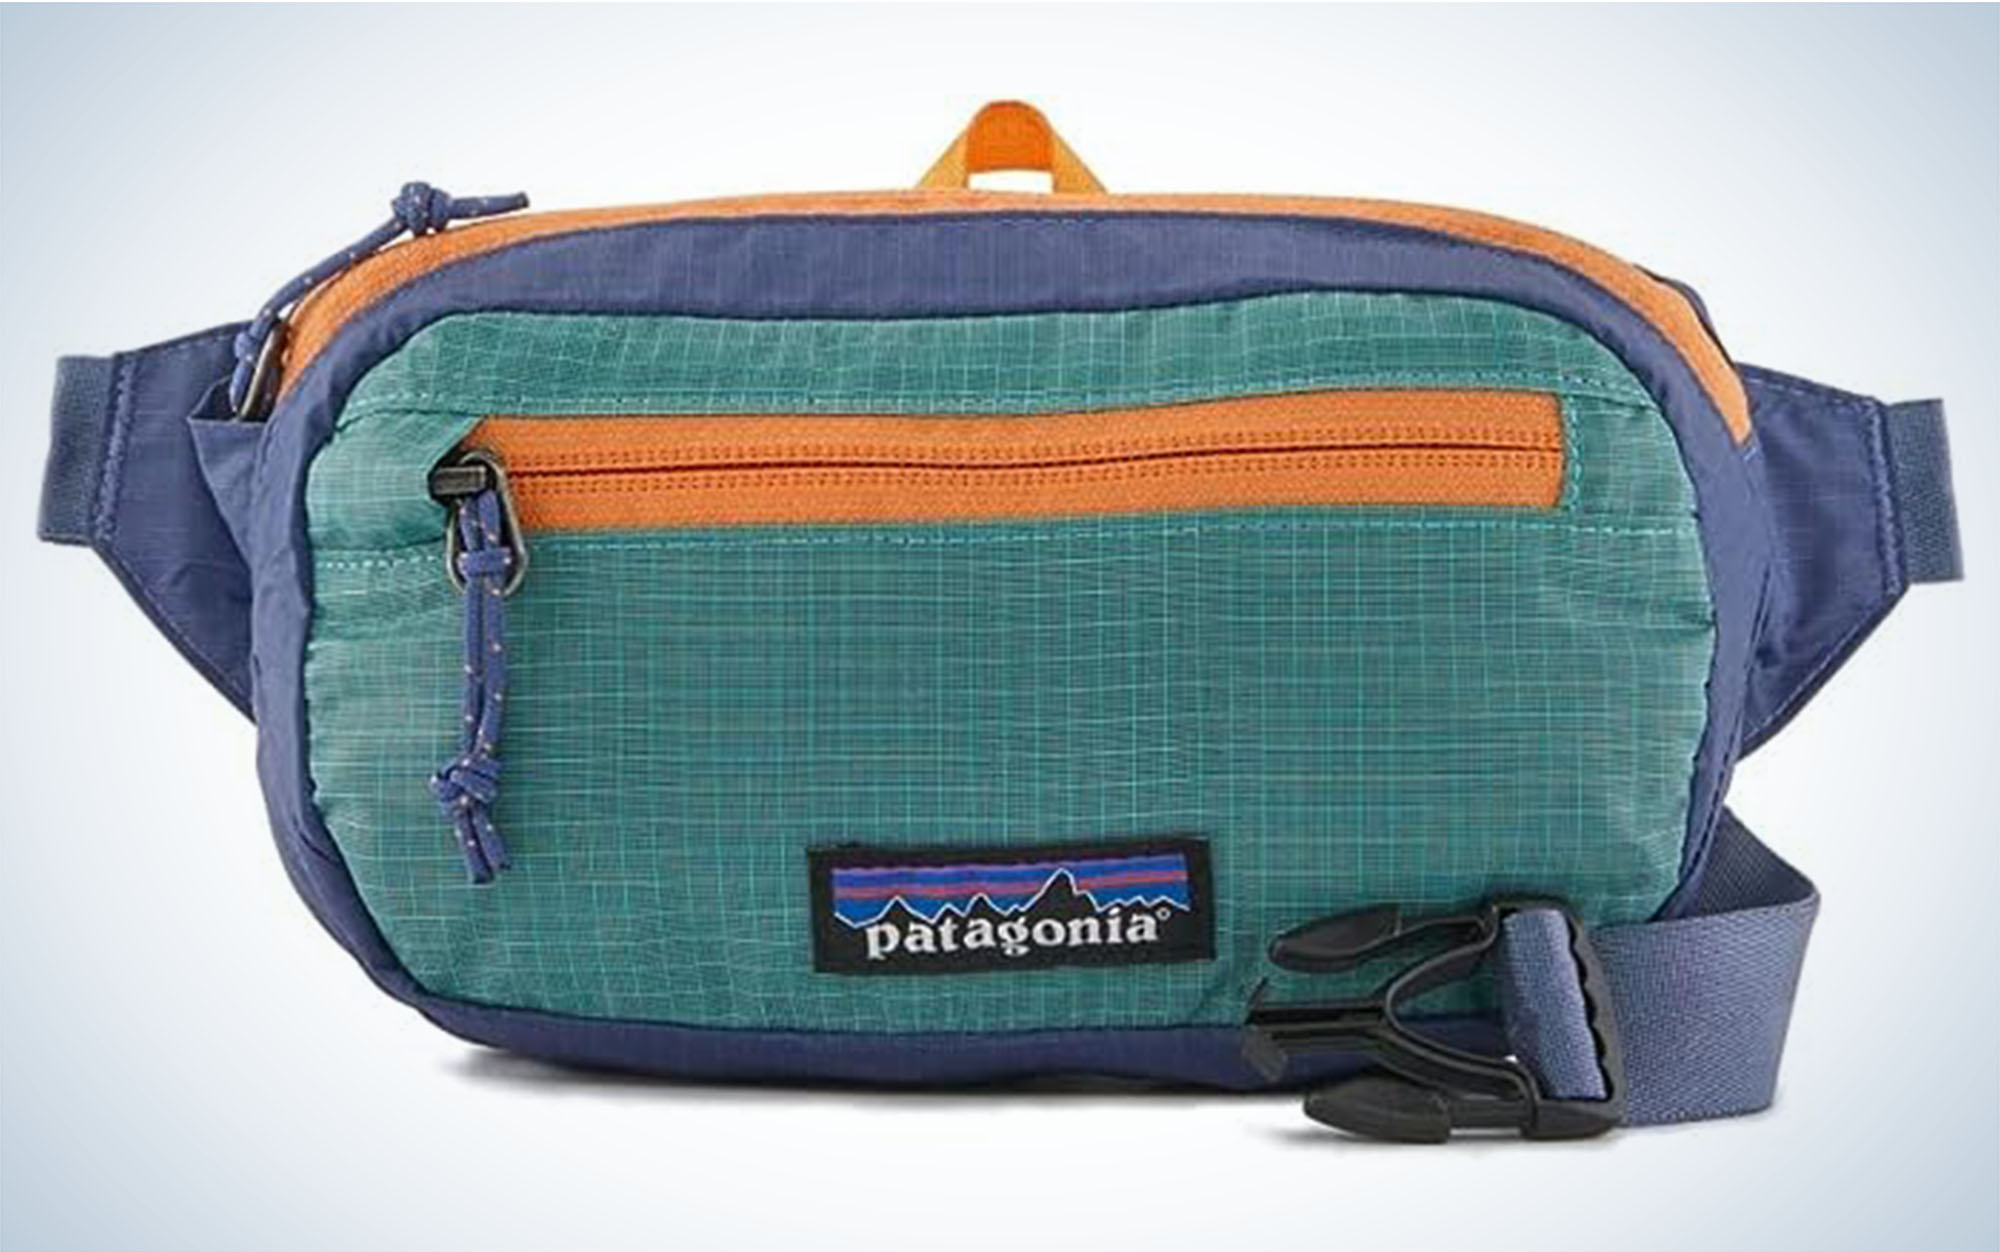 We tested the Patagonia Ultralight Black Hole Mini Hip Pack 1L.